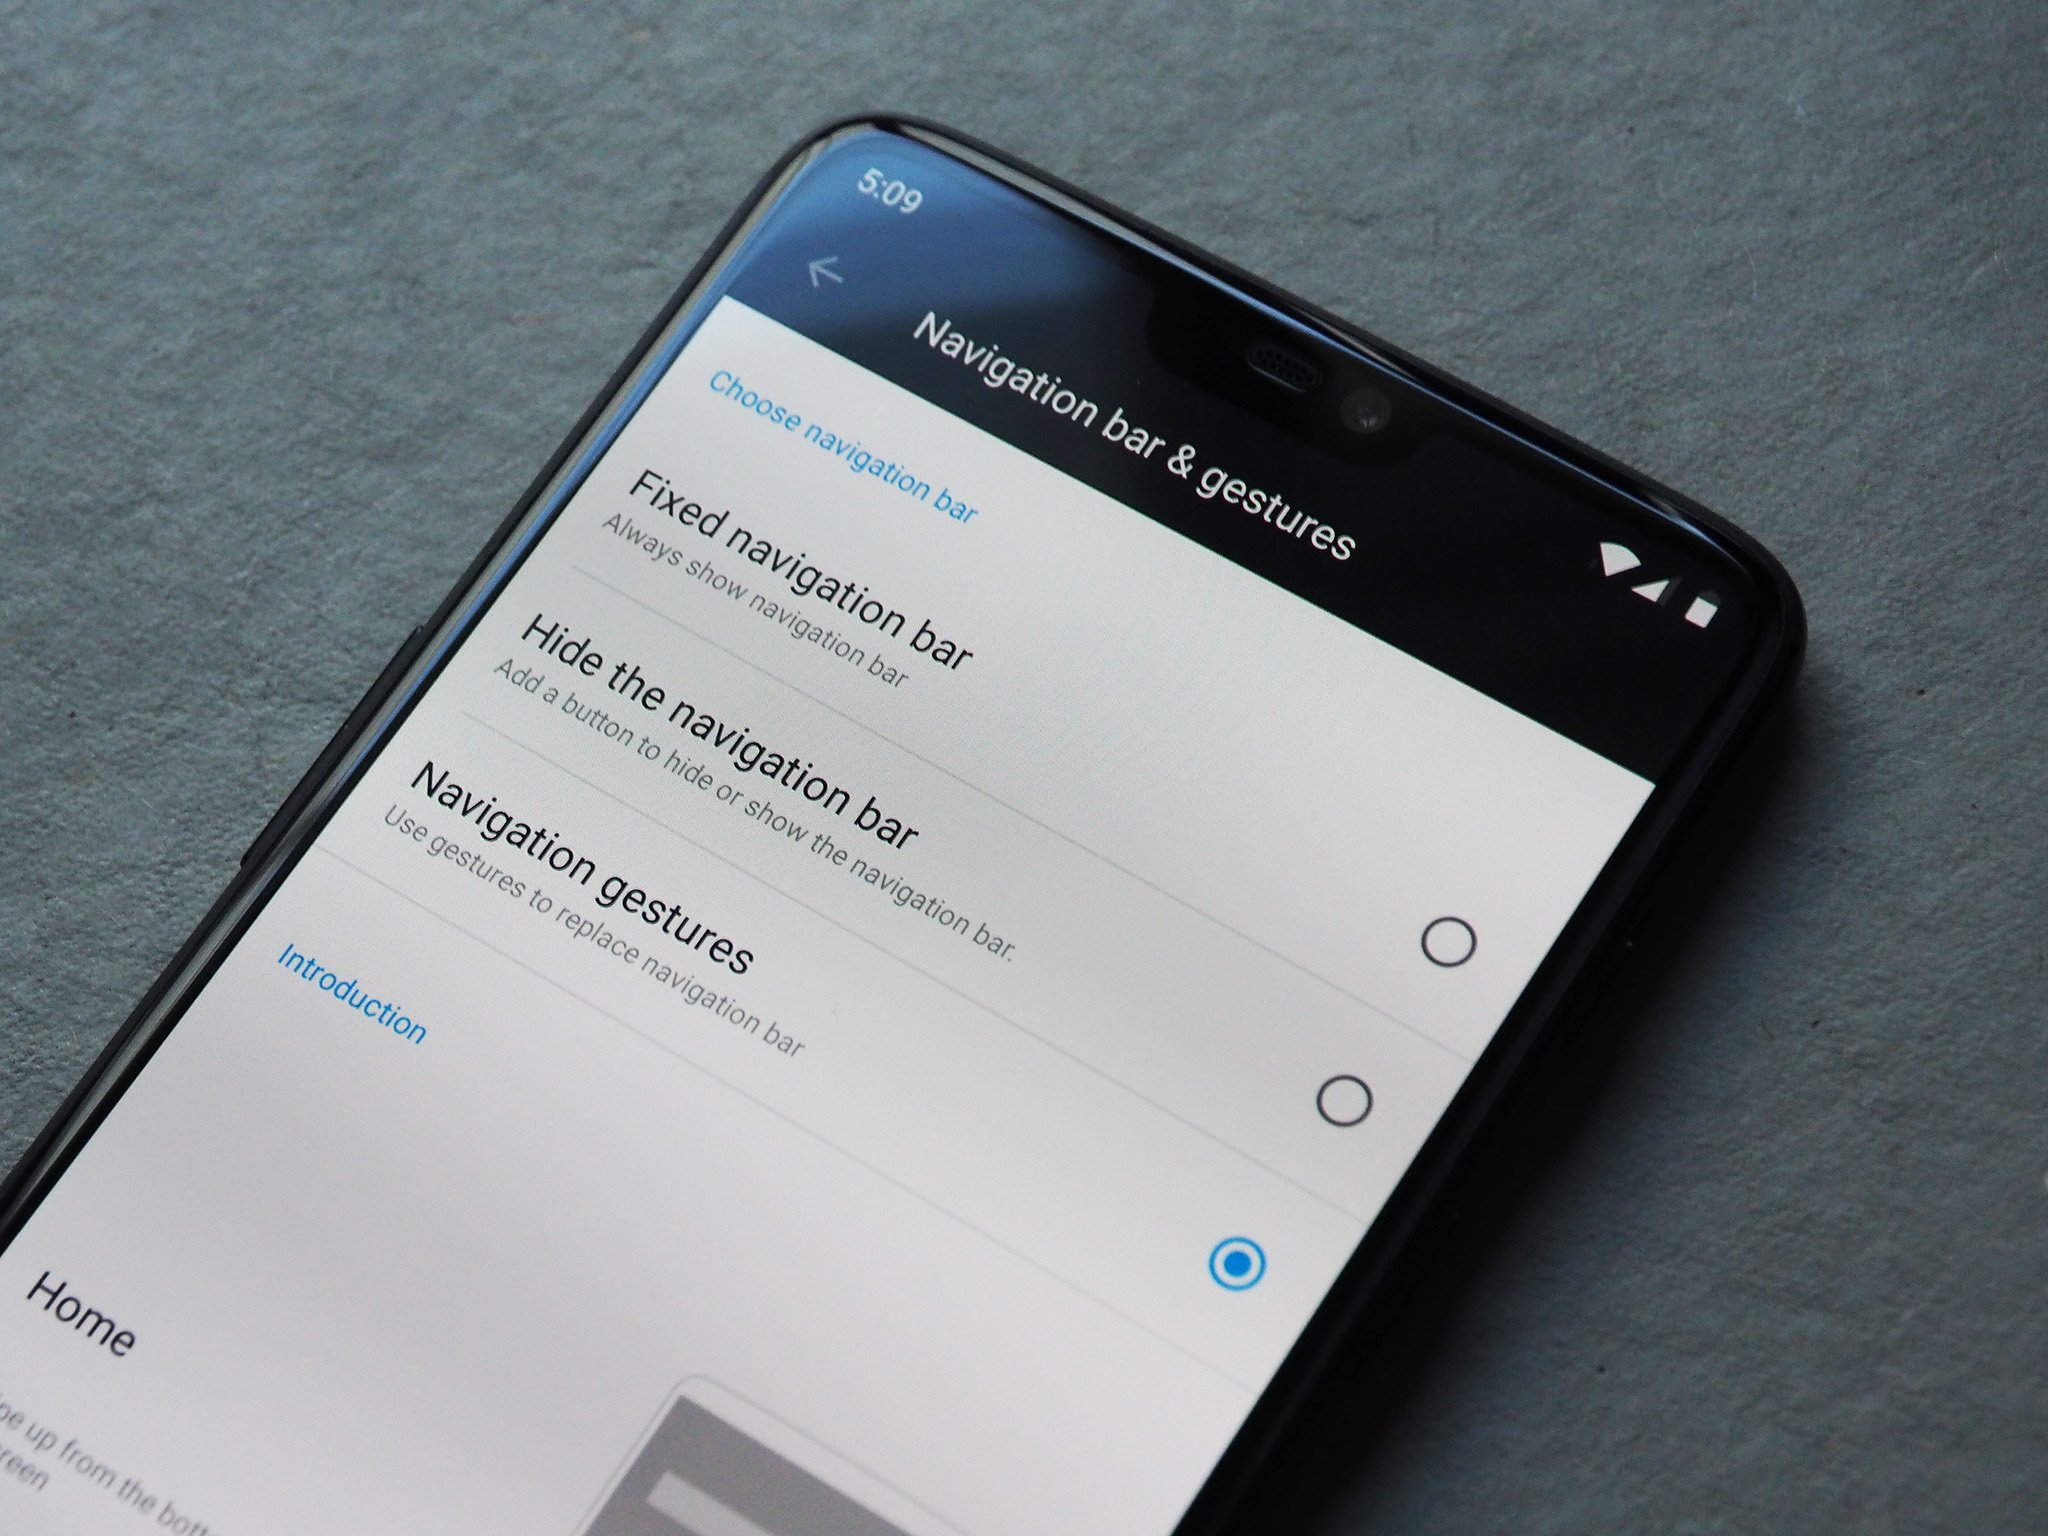 How to enable navigation gestures on the OnePlus 6